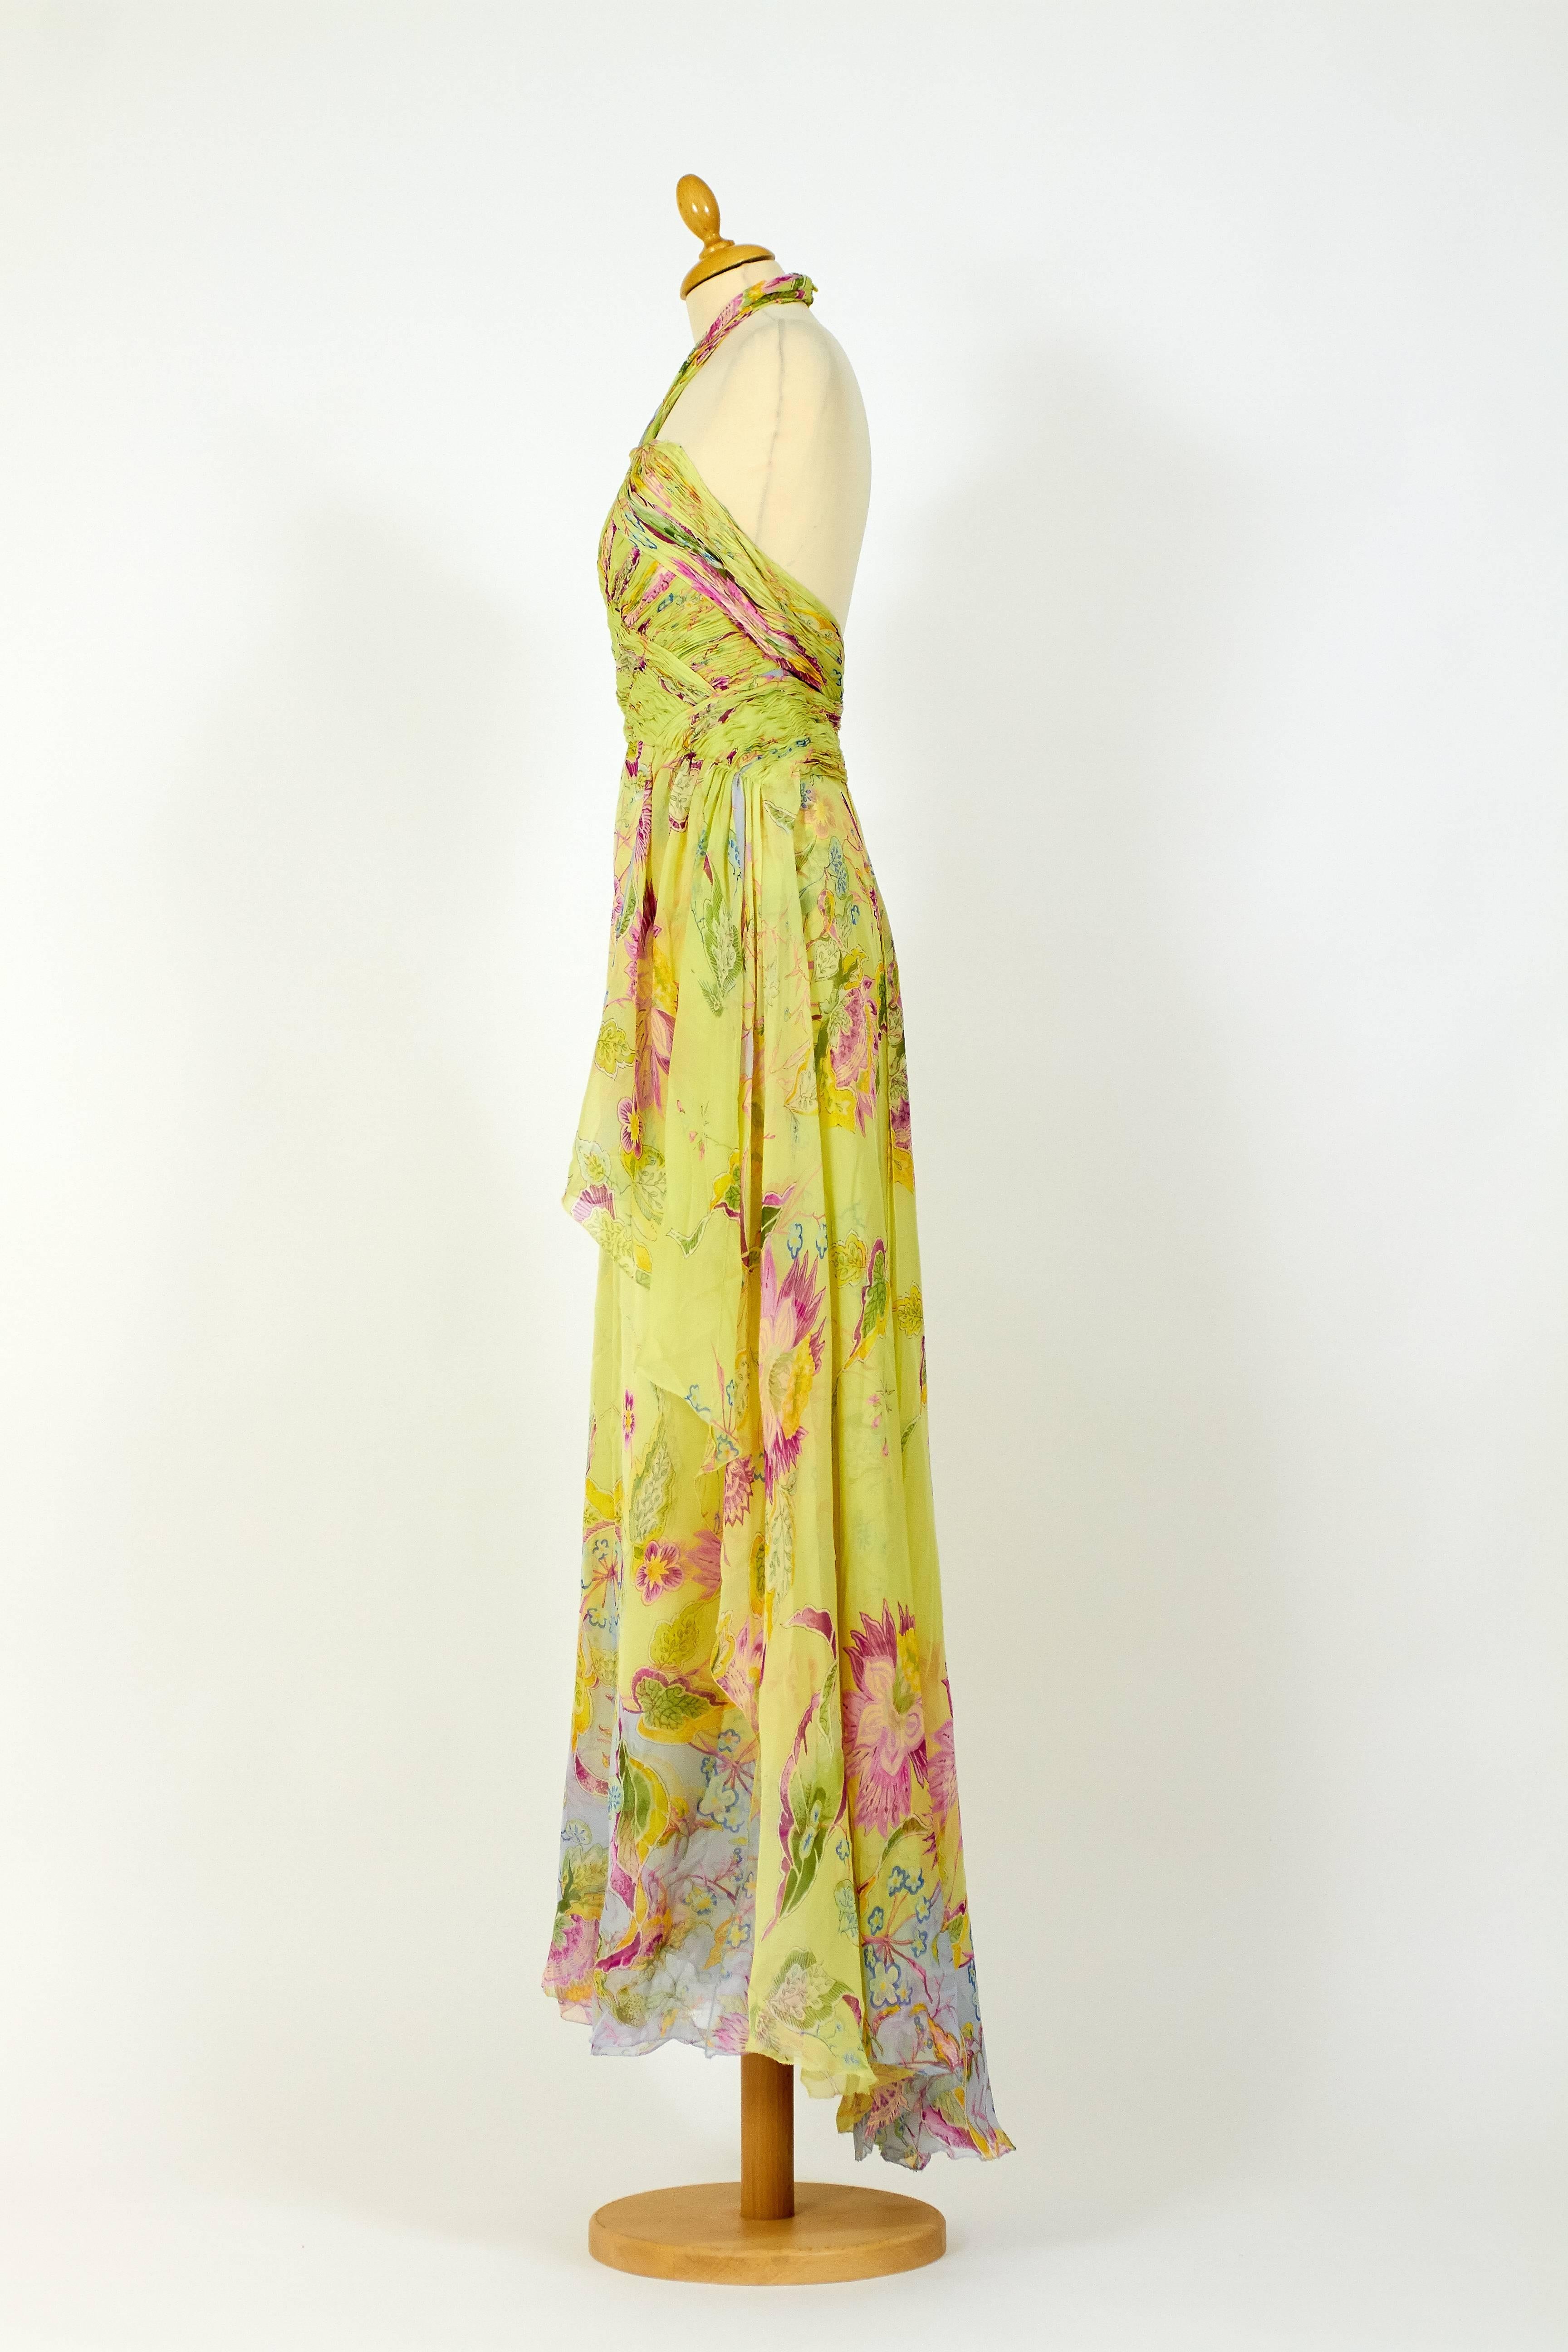 Valentino Silk Floral Print Halter Top Long Dress In Excellent Condition For Sale In Milan, Italy